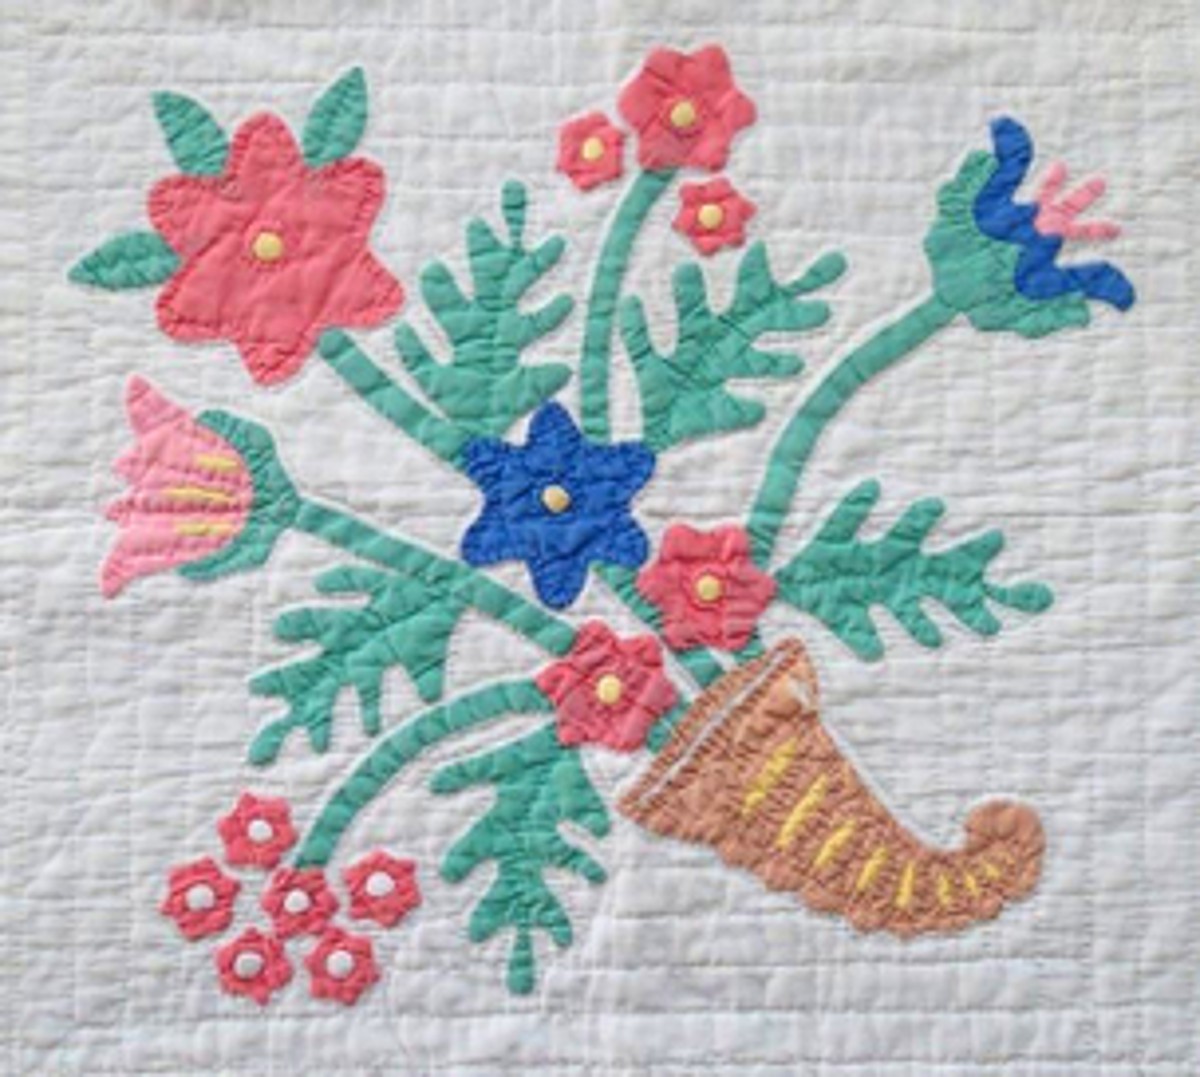 A Horn Of Plenty quilted applique